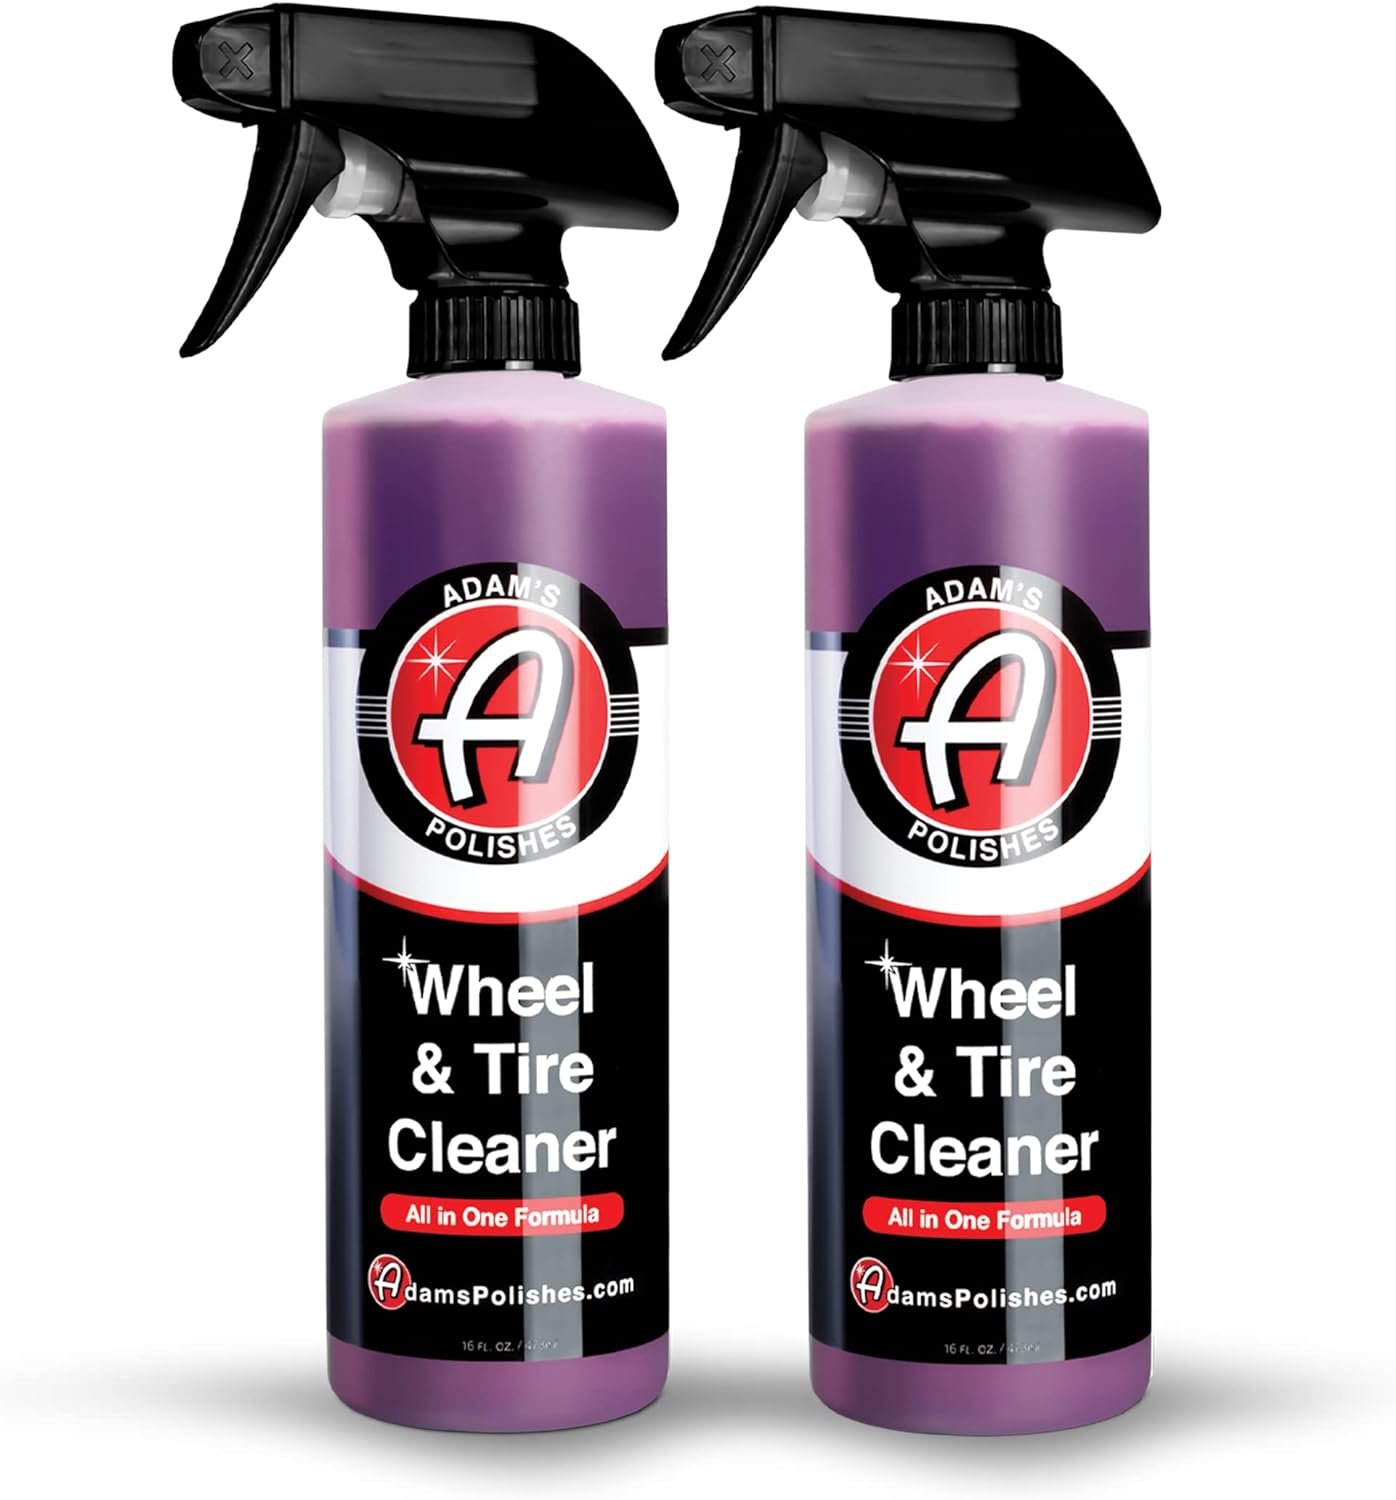 Adam’s Polishes Wheel & Tire Cleaner Review